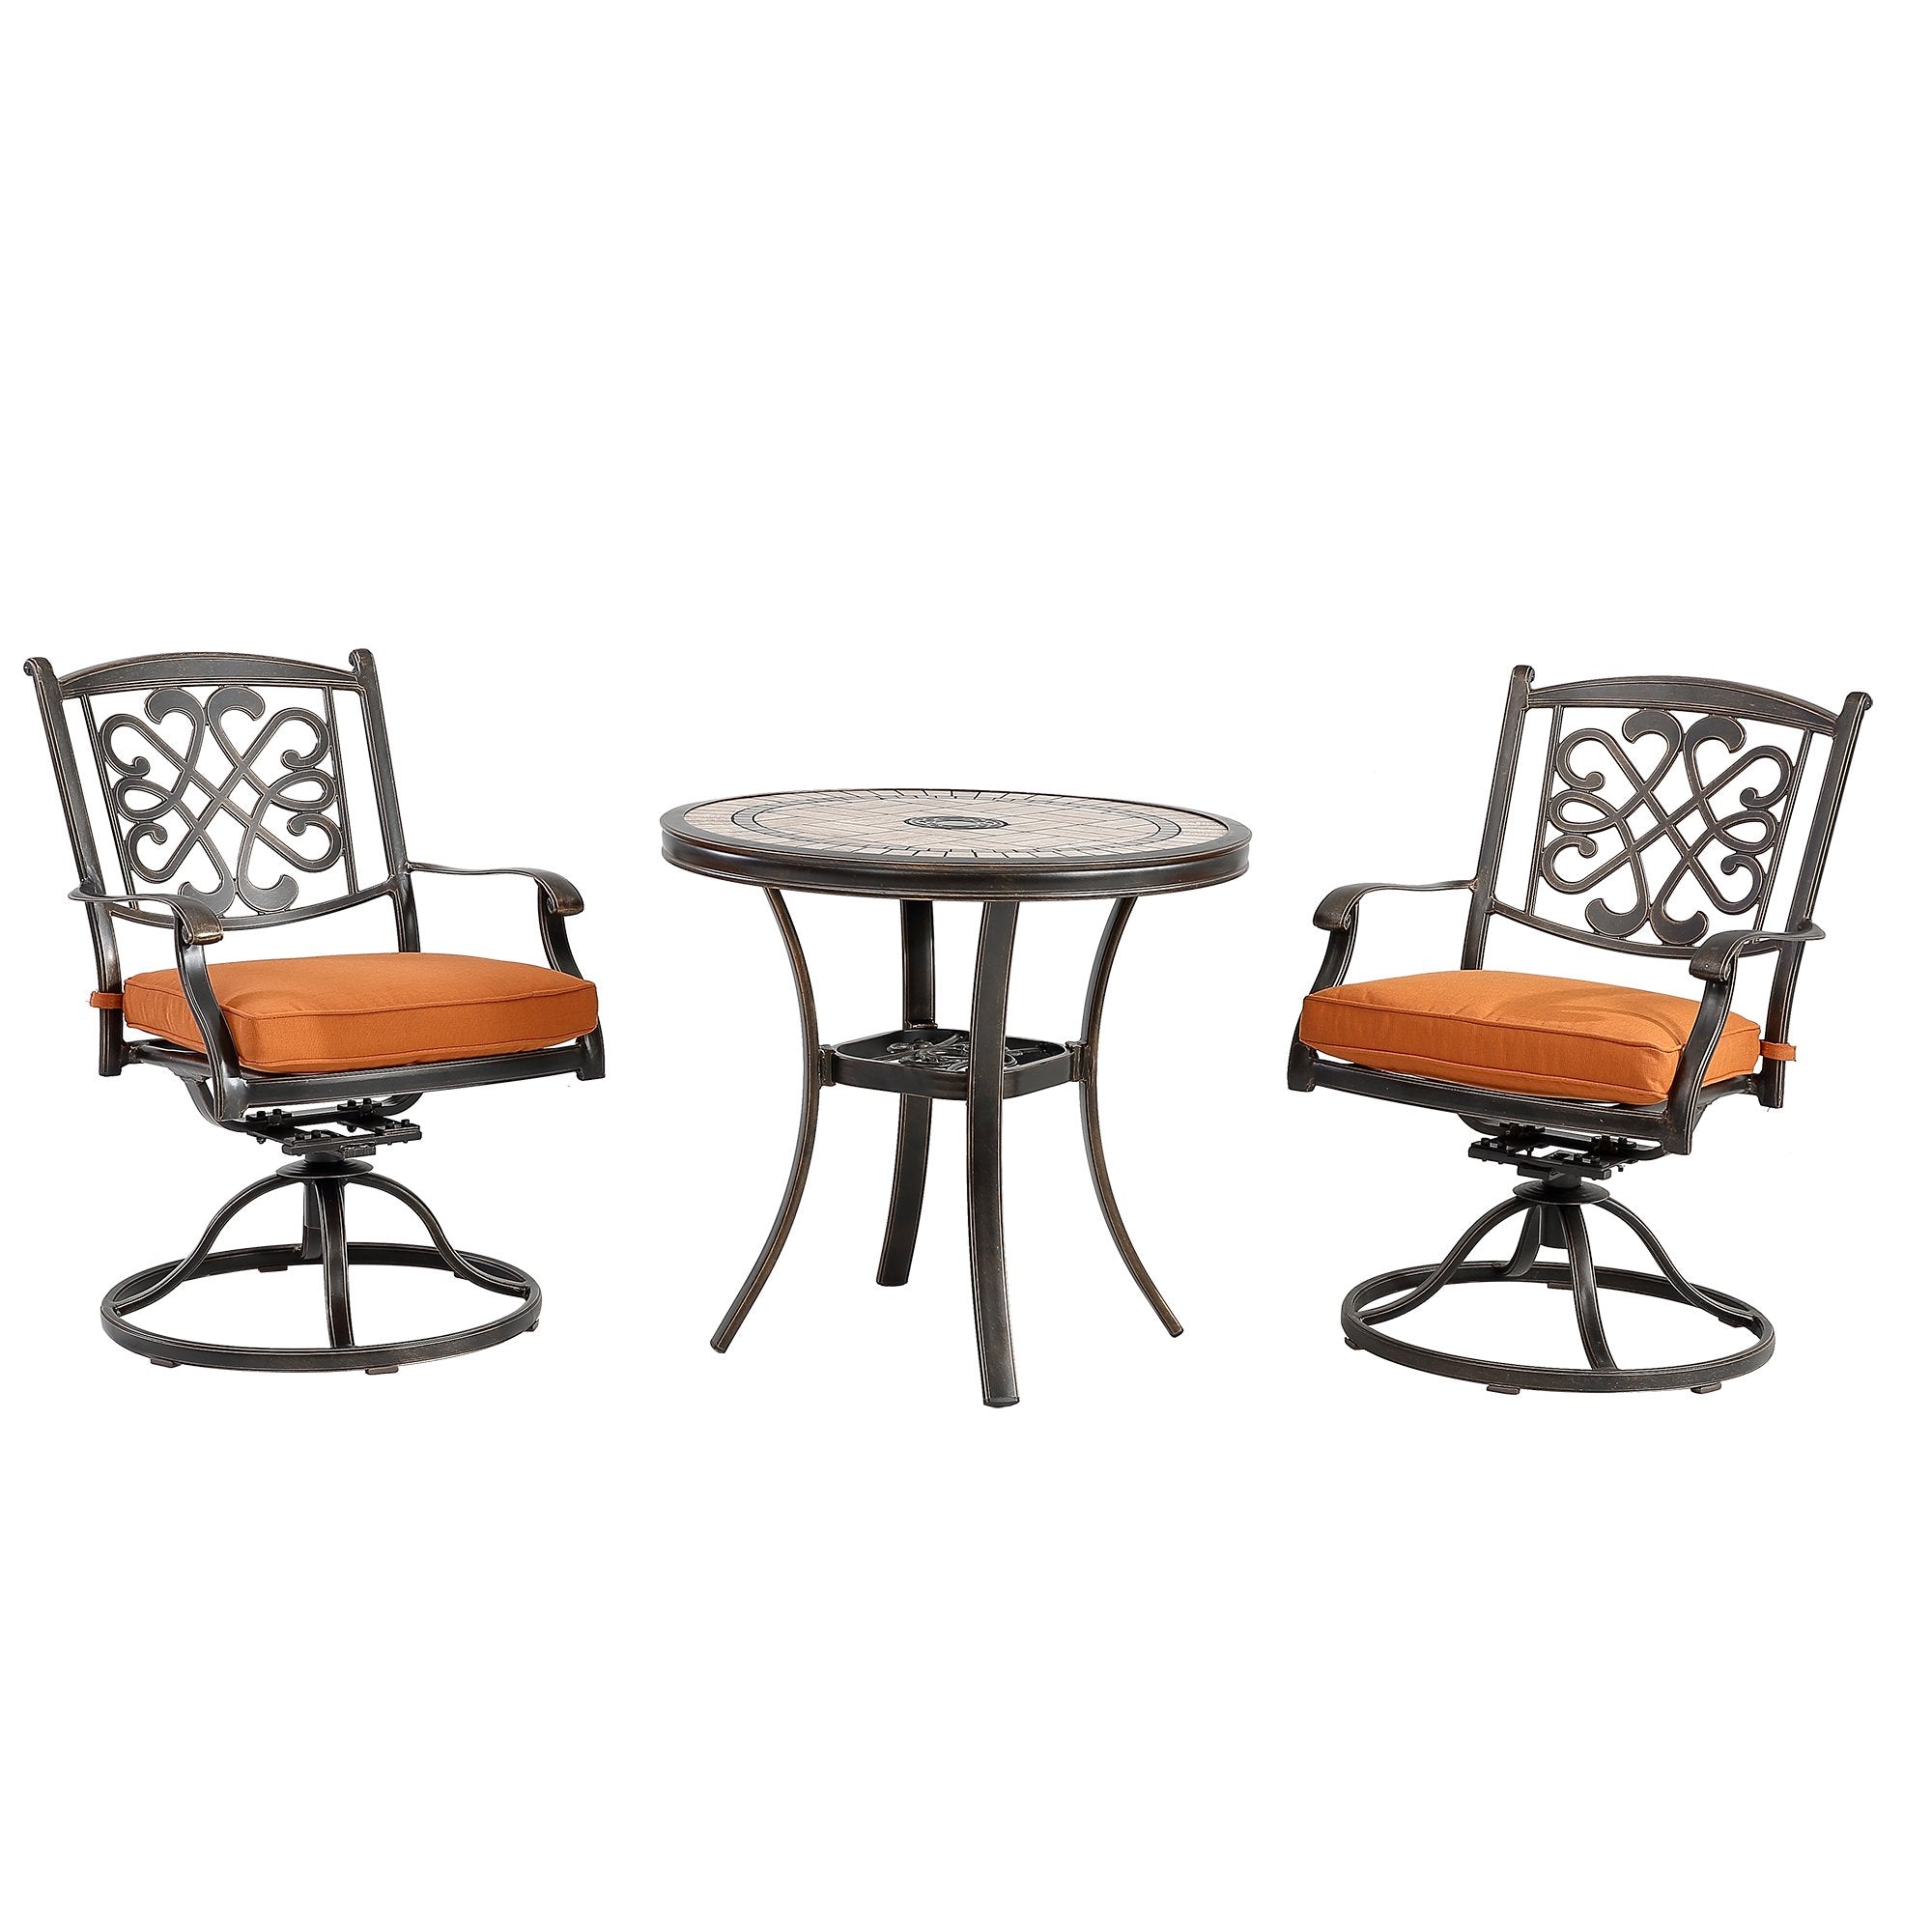 3-piece cast aluminum dining chair set Tile-Top Dining Table and flower-shaped back swivel chair-Boyel Living